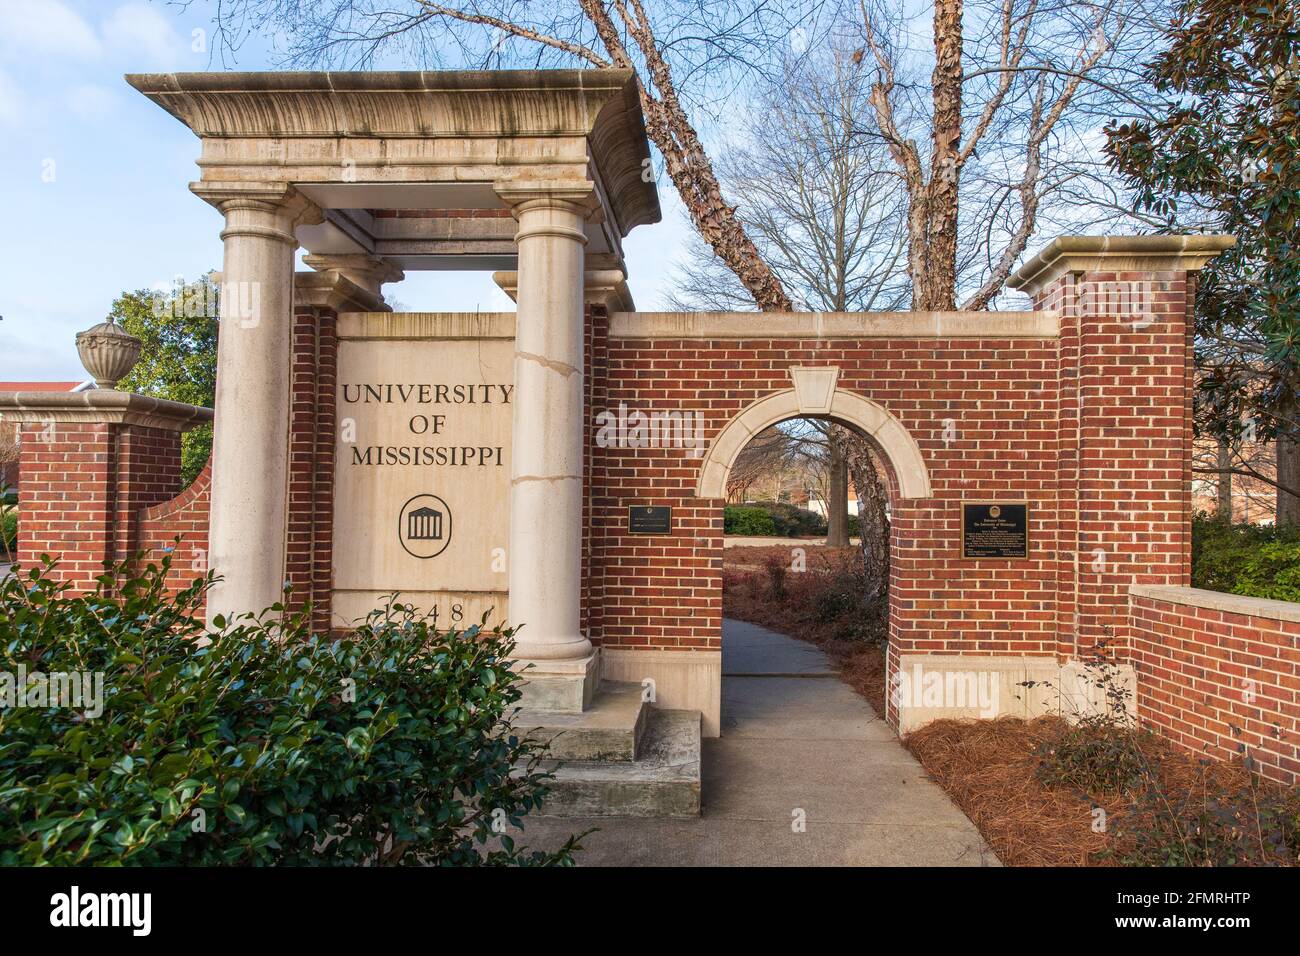 Oxford, MS - February 2, 2021: Entrance to the University of Mississippi in Oxford, MS Stock Photo